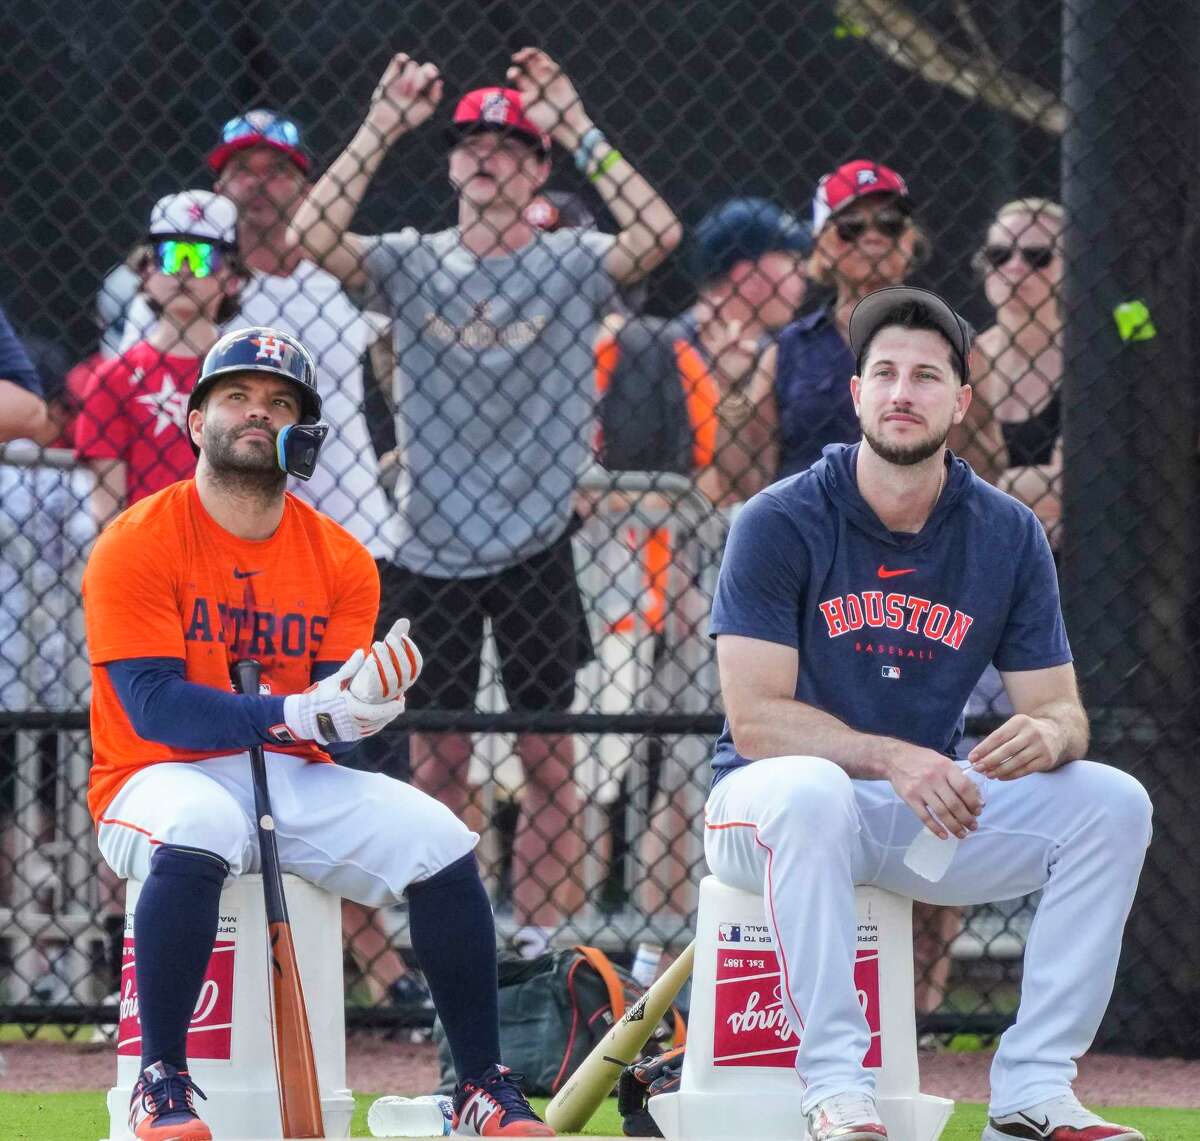 Houston Astros Jose Altuve and Kyle Tucker wait their turns for batting practice during workouts at the Astros spring training complex at The Ballpark of the Palm Beaches on Wednesday, Feb. 22, 2023 in West Palm Beach .